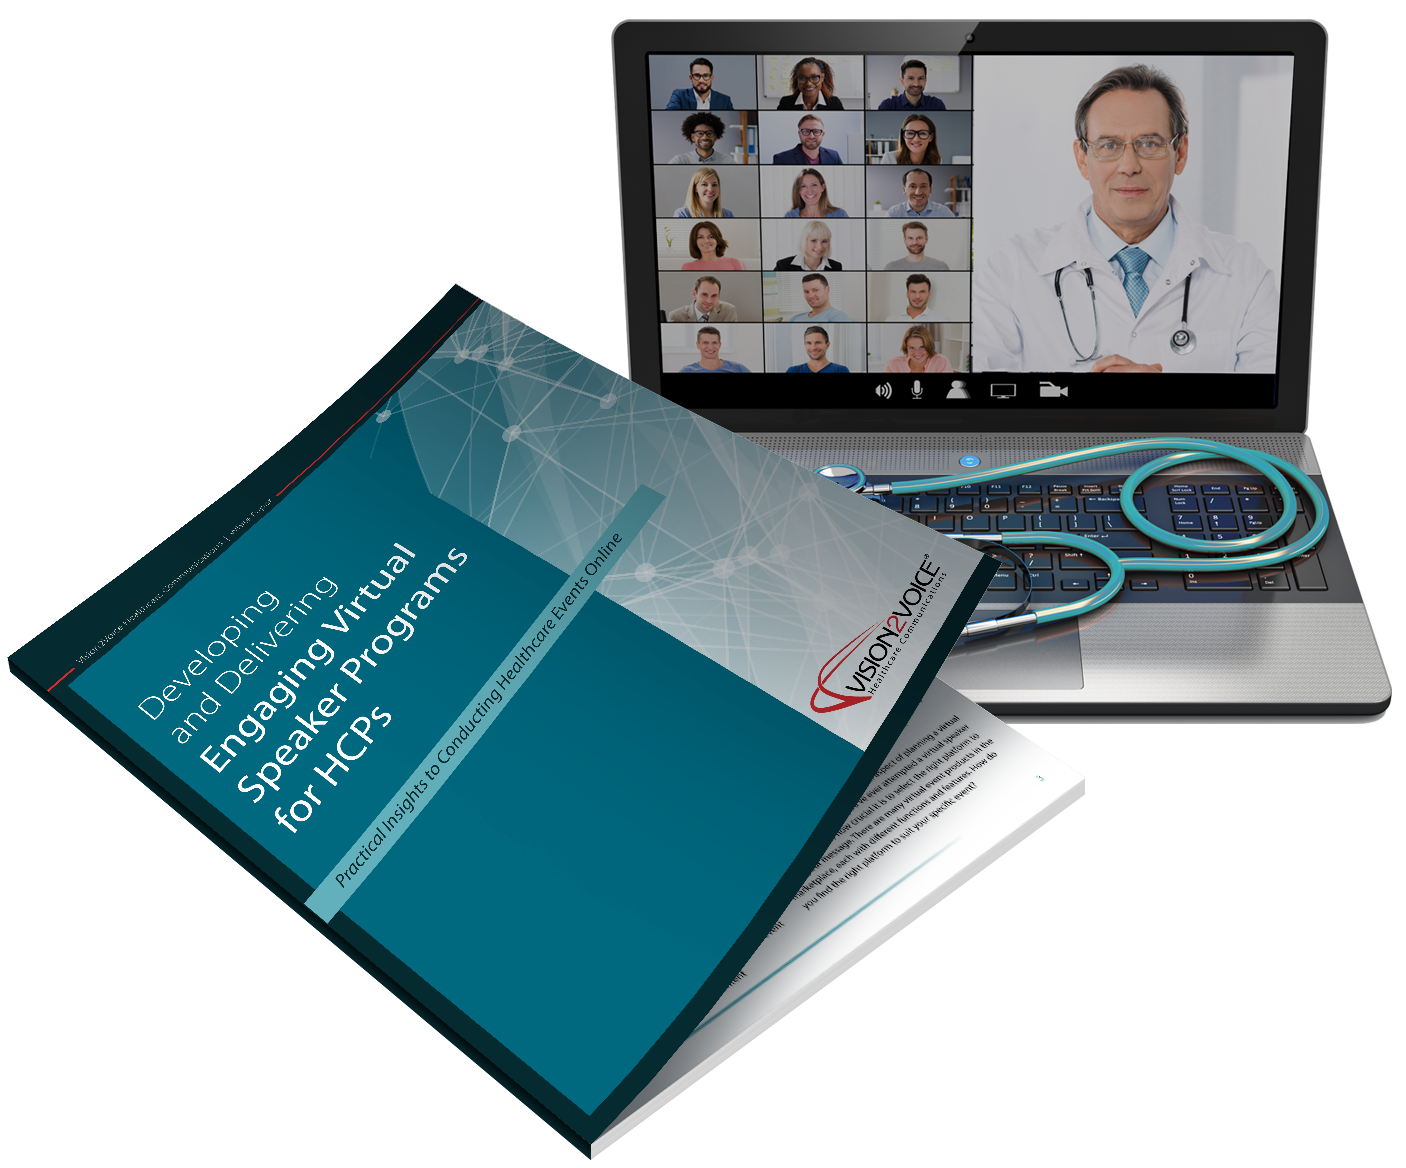 WHITE PAPER: Developing and Delivering Engaging Virtual Speaker Programs for HCPs